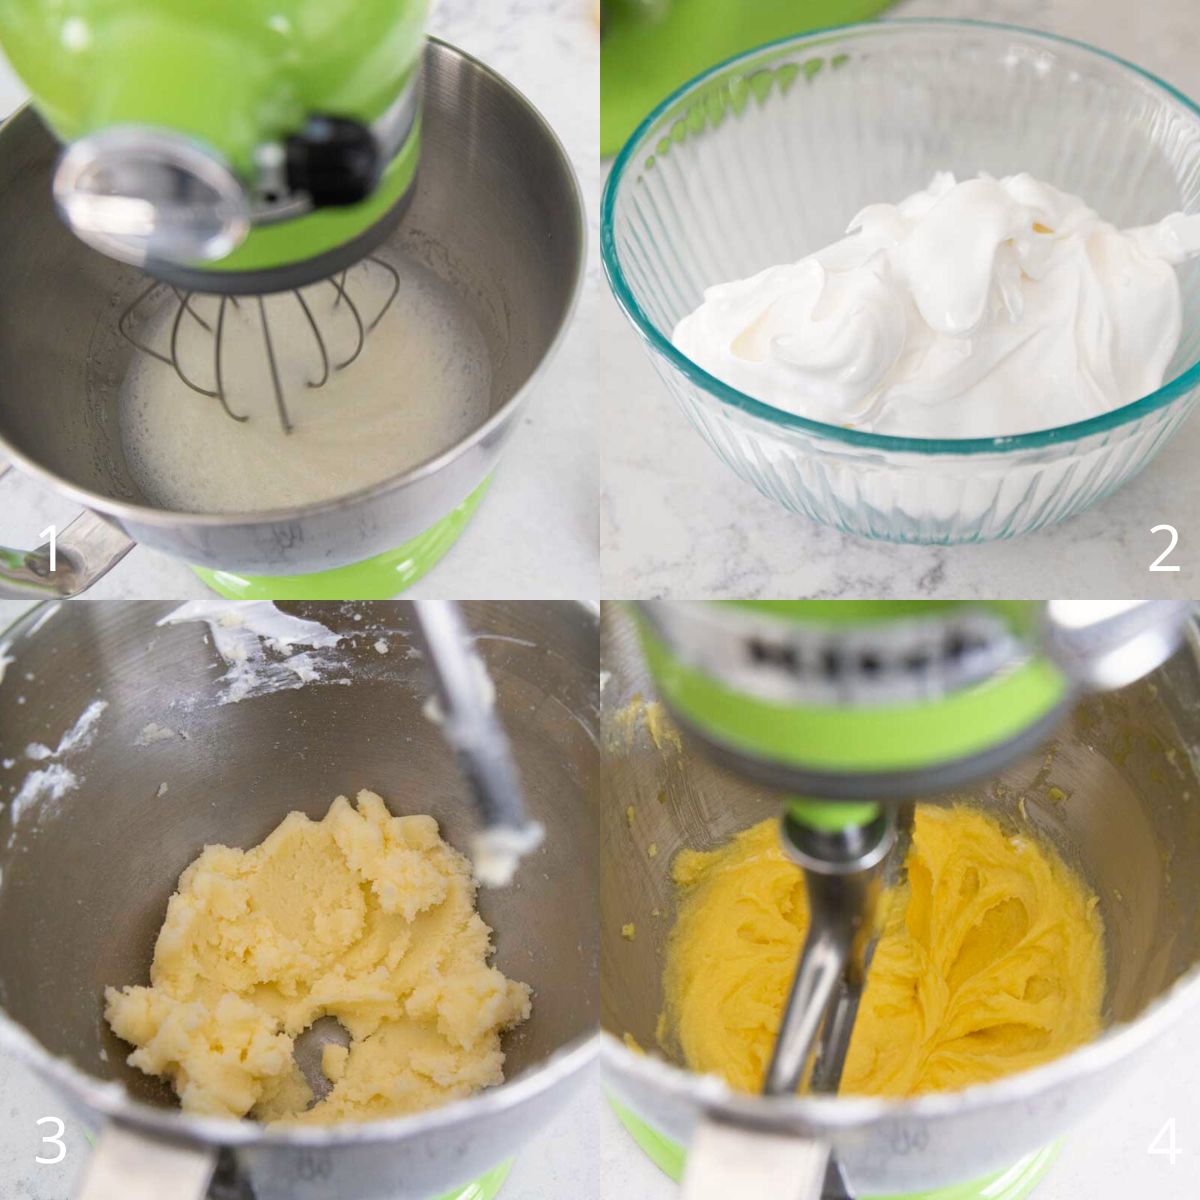 The step by step photos show how to beat the egg whites and then beat the sugar and butter with egg yolks.